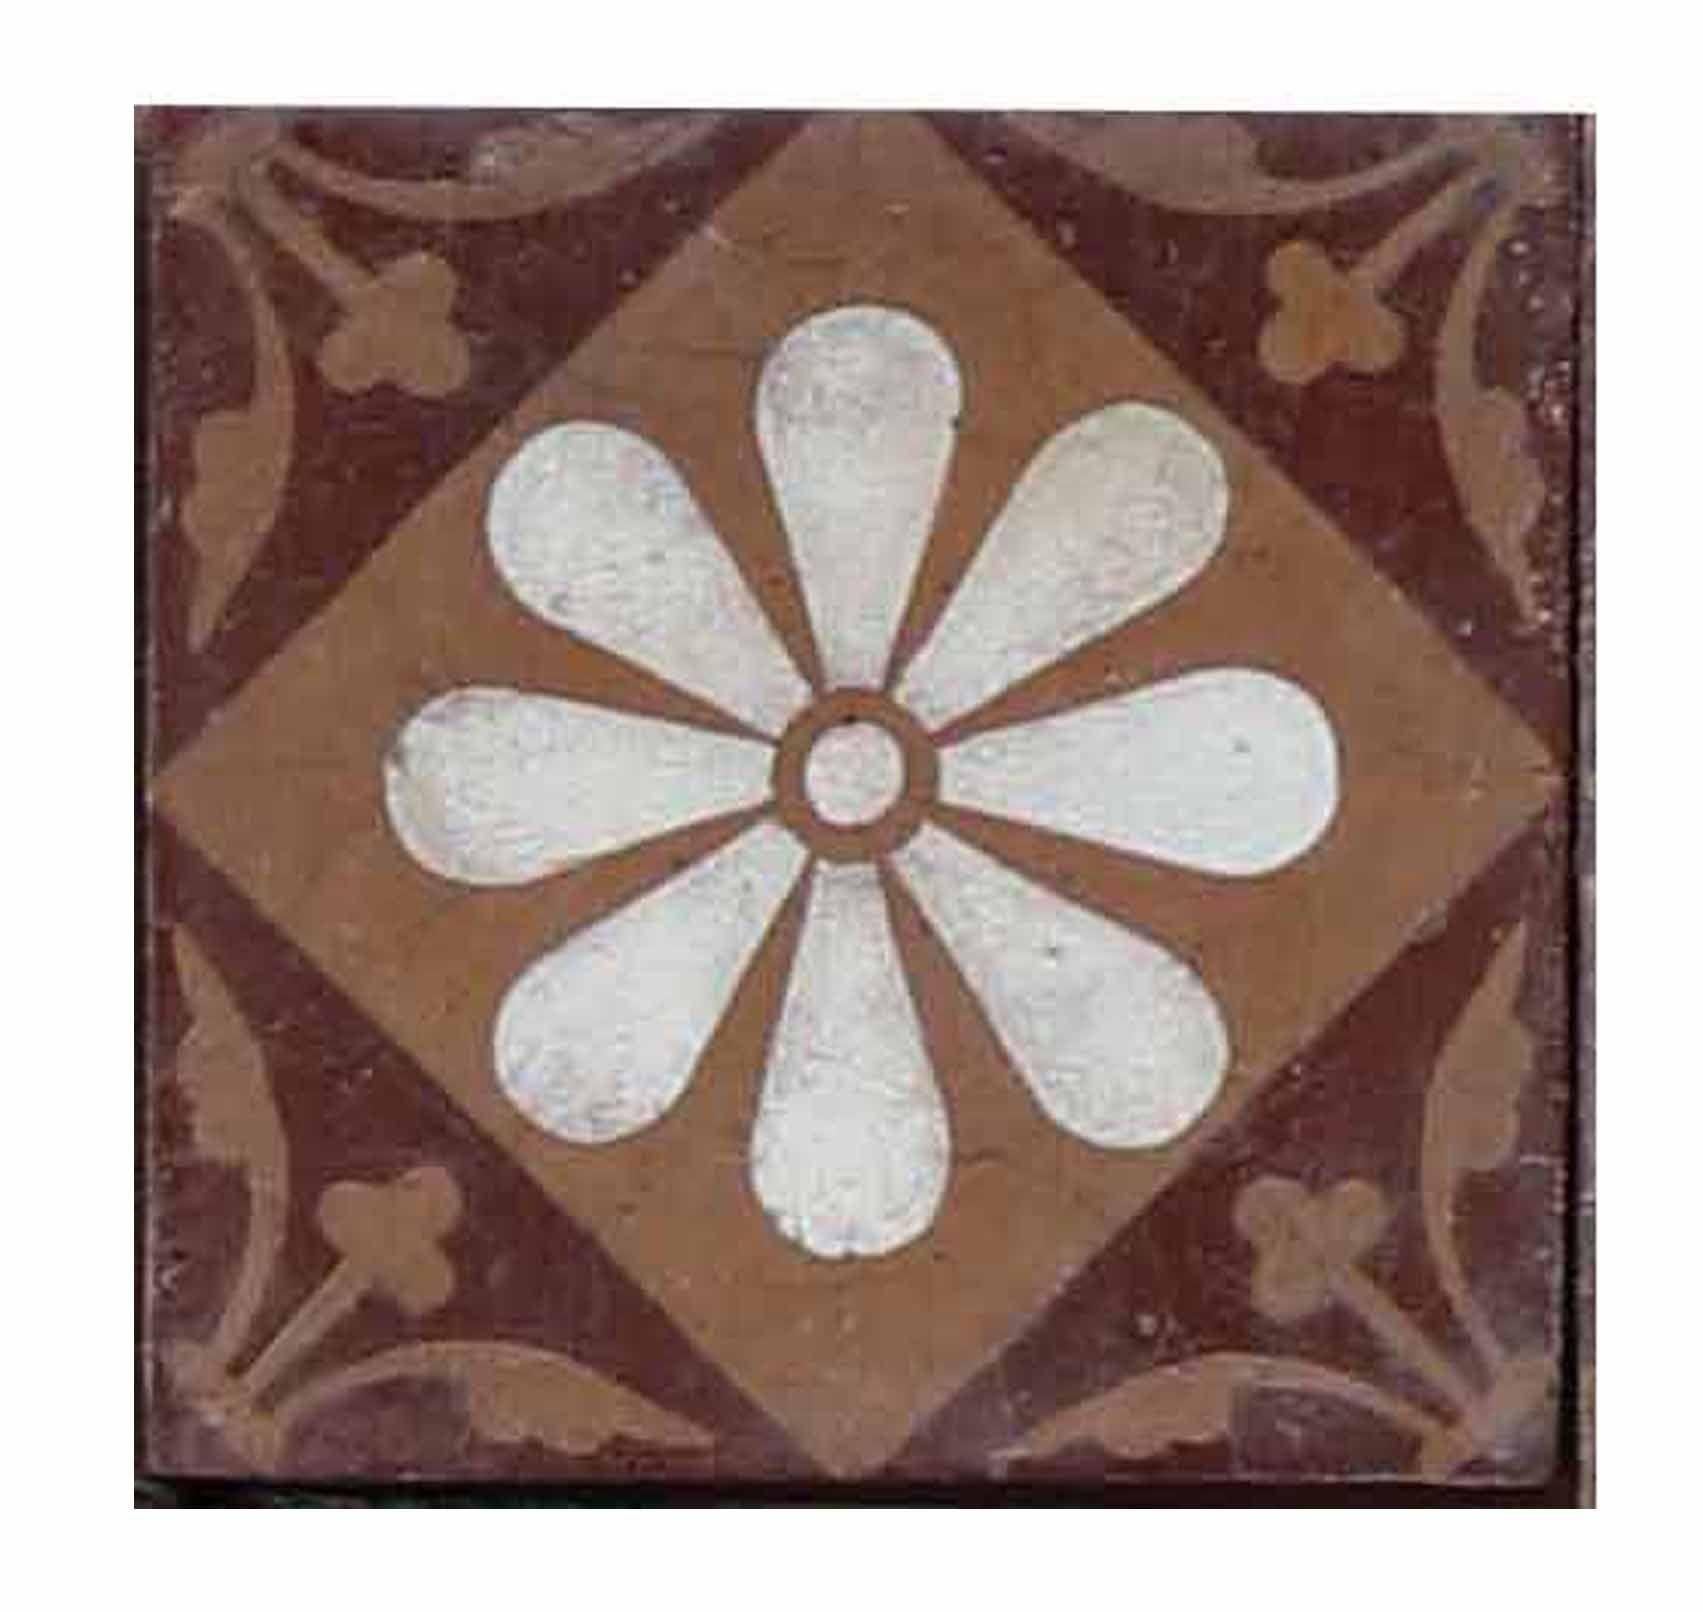 An attractive set of 44 original antique ceramic patterned tiles, suitable for either a fireplace hearth or Splash-back. Overall size approximately 120 x 44 cm (47.24 x 17.32 inches).